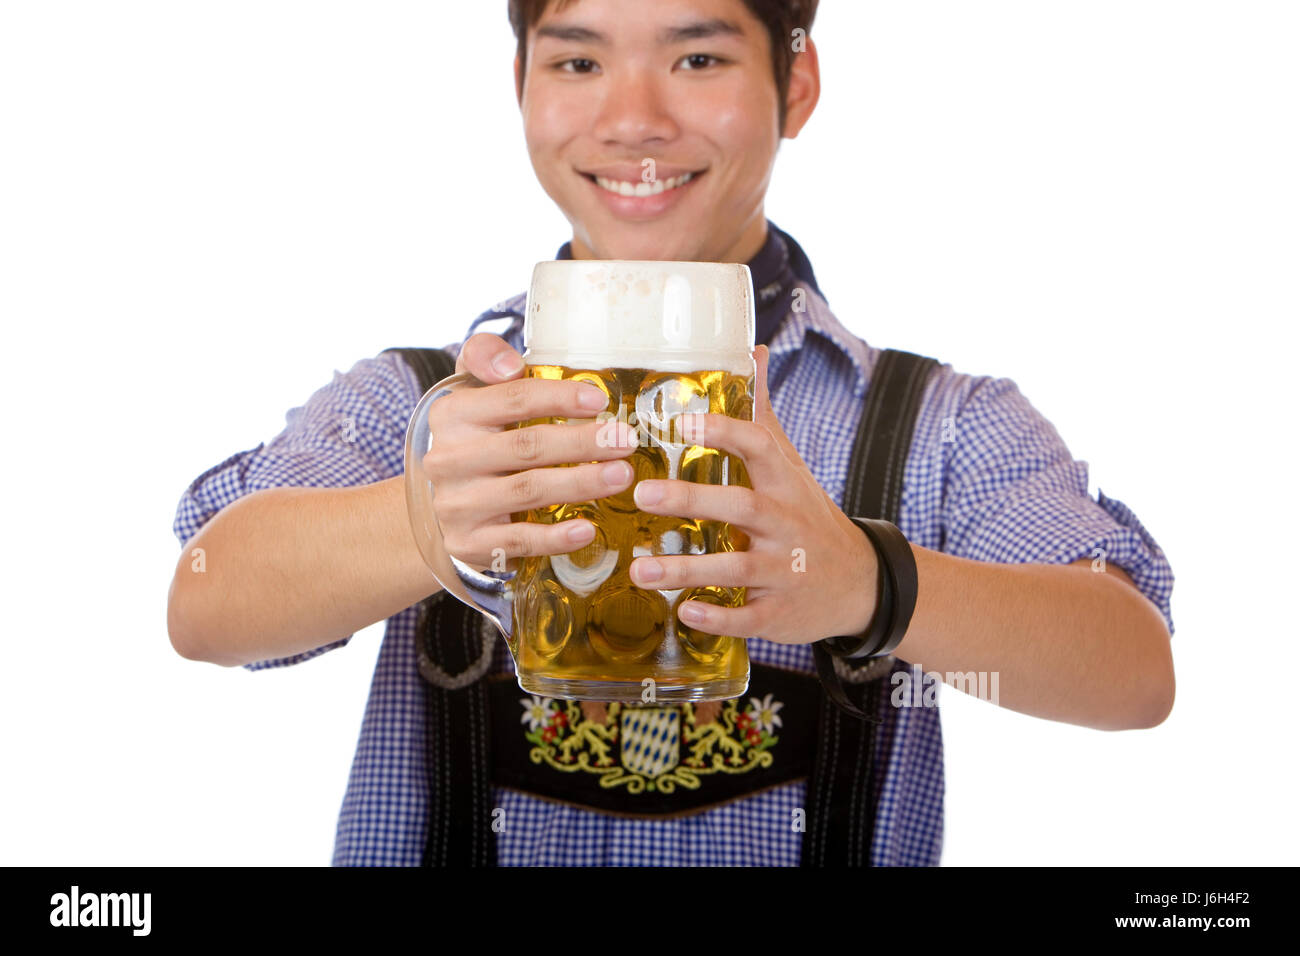 beer mass asian delighted unambitious enthusiastic merry radiant with joy Stock Photo